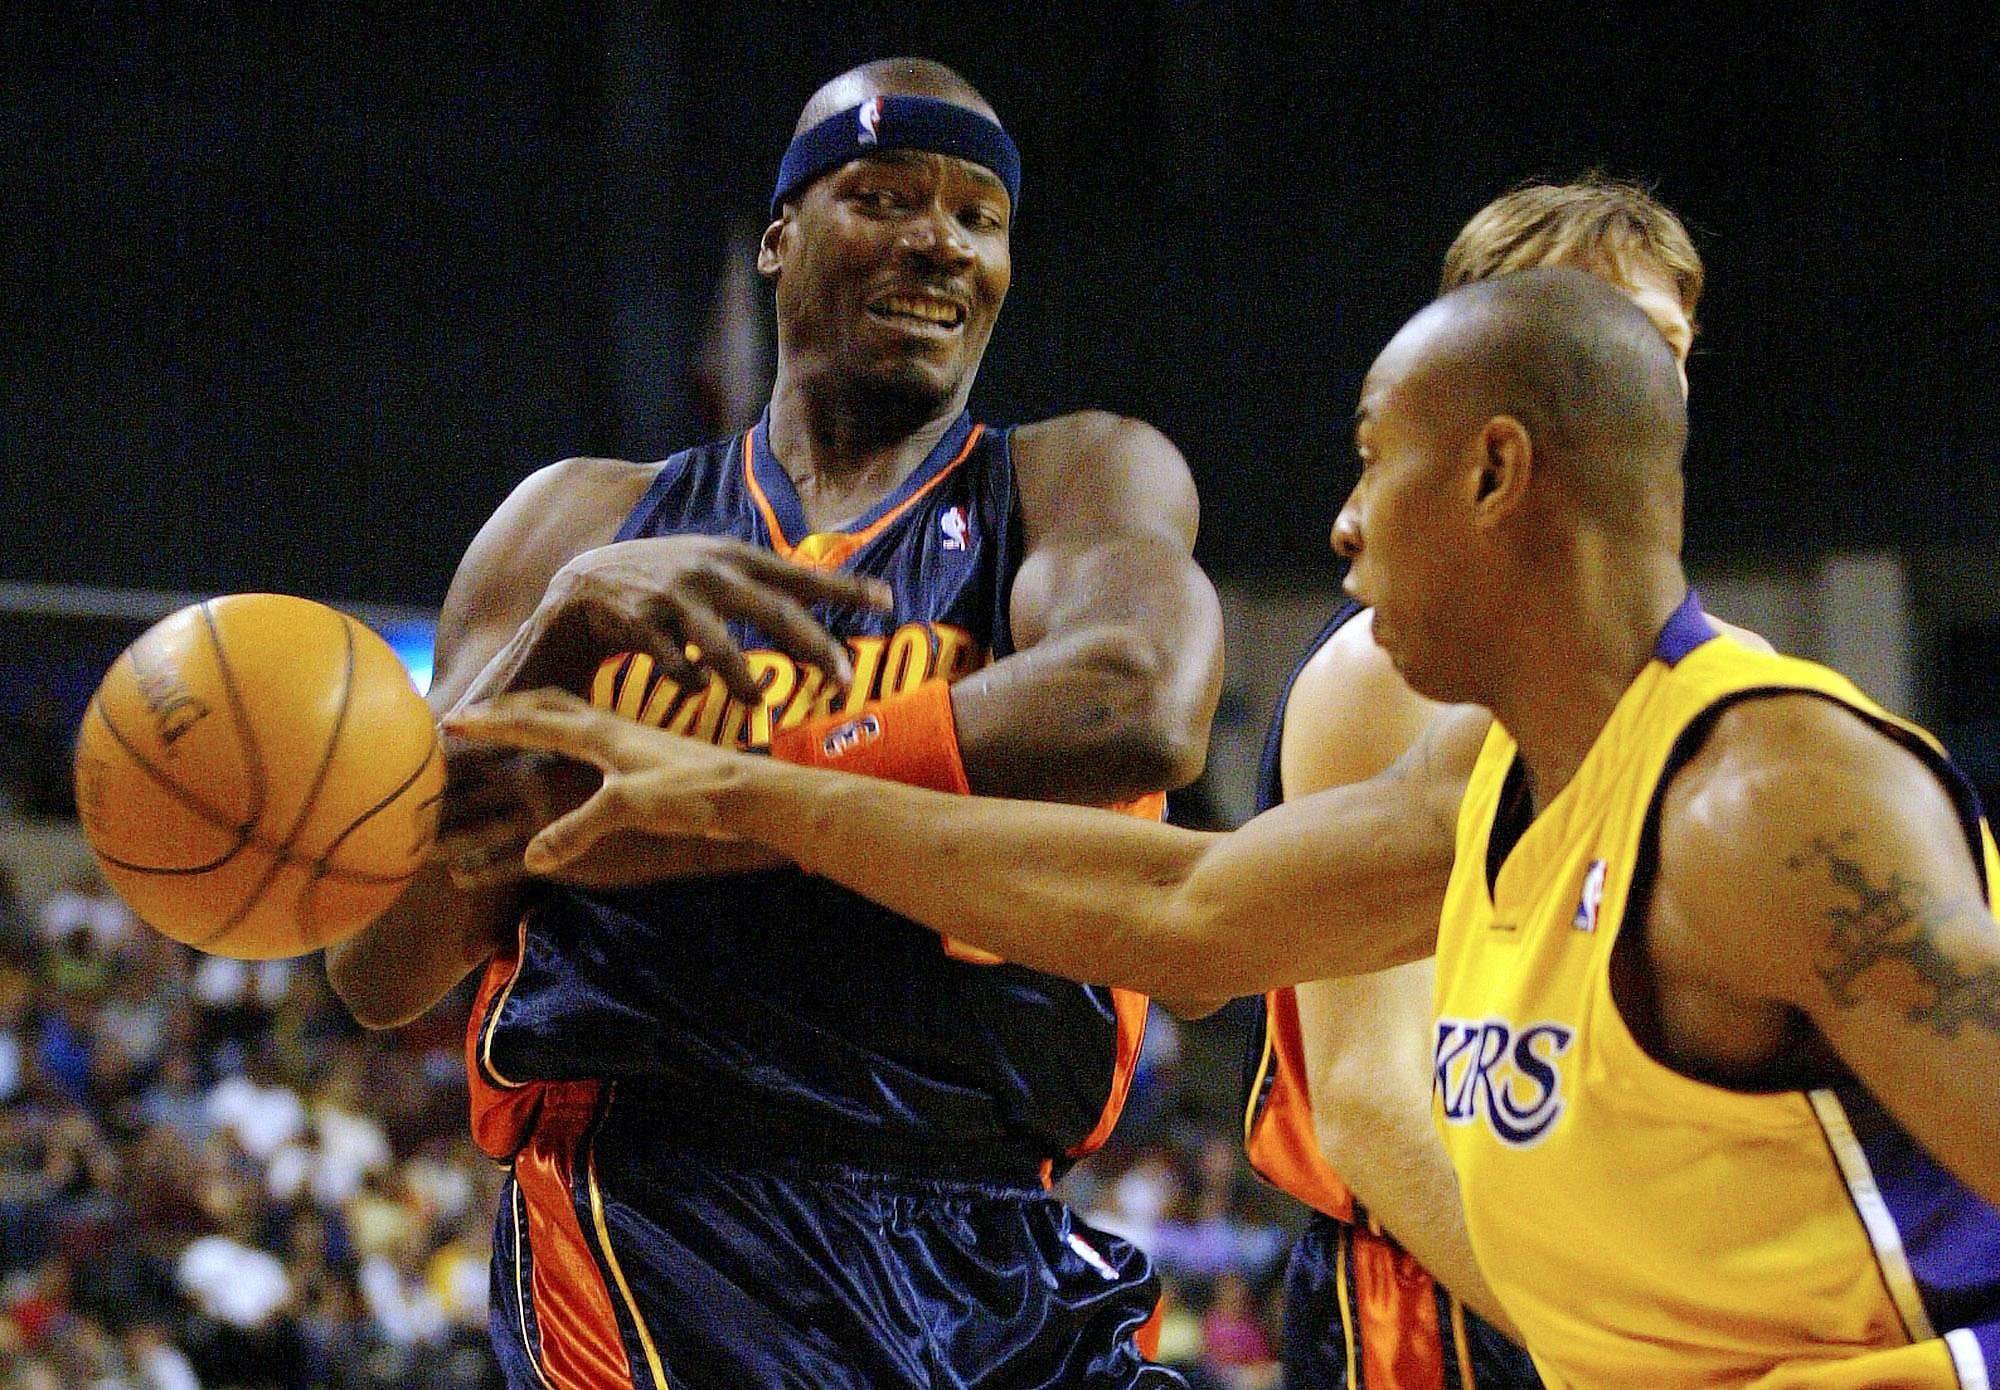 Former NBA All-Star and Sixth Man of the Year Cliff Robinson dies at 53